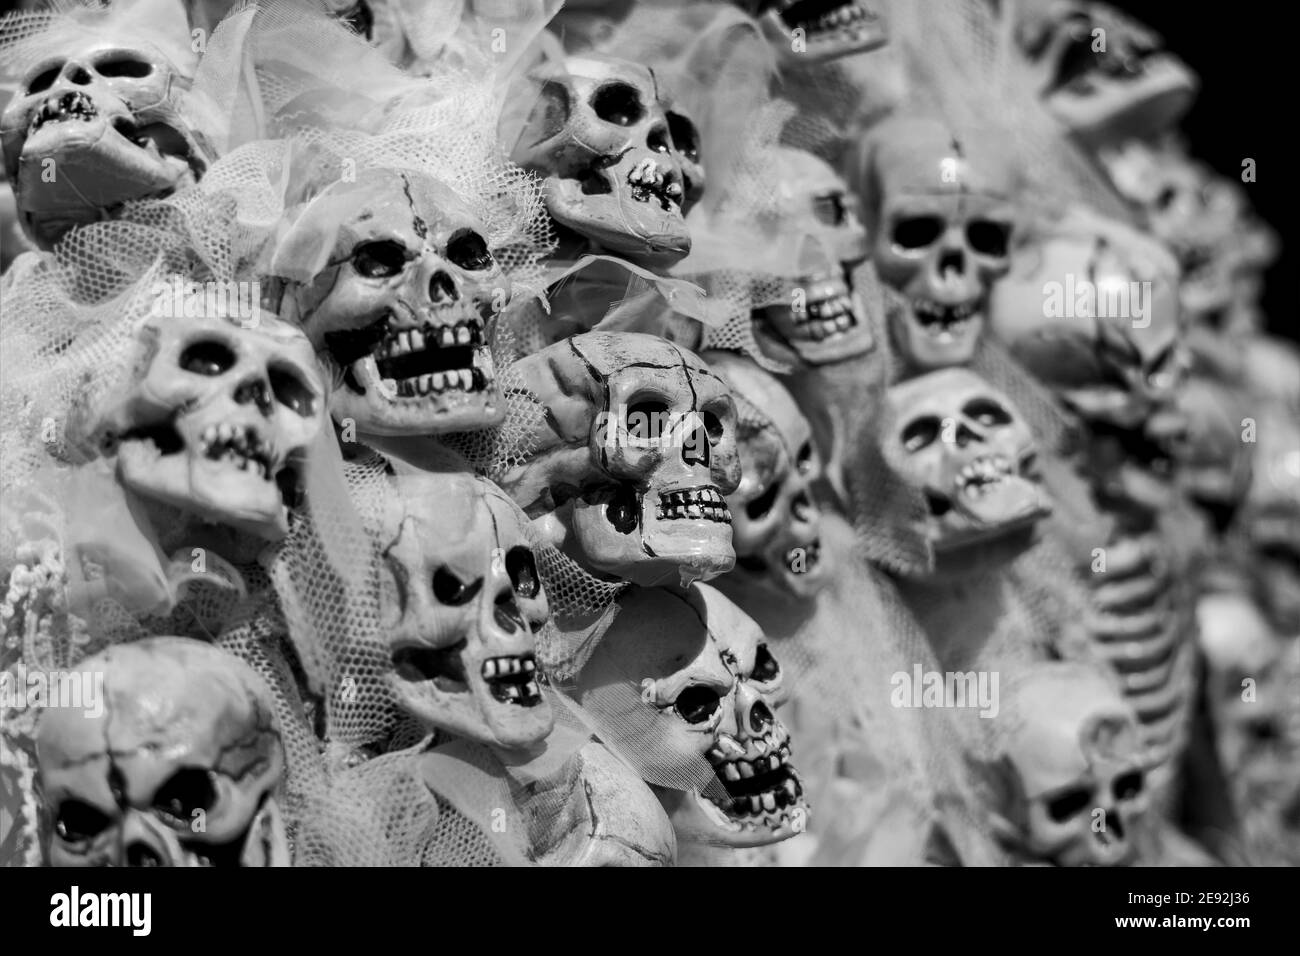 Memento Mori by Sheela Stoneman on display at the WoW World of Wearable Art Museum, Nelson, South Island, New Zealand. Stock Photo